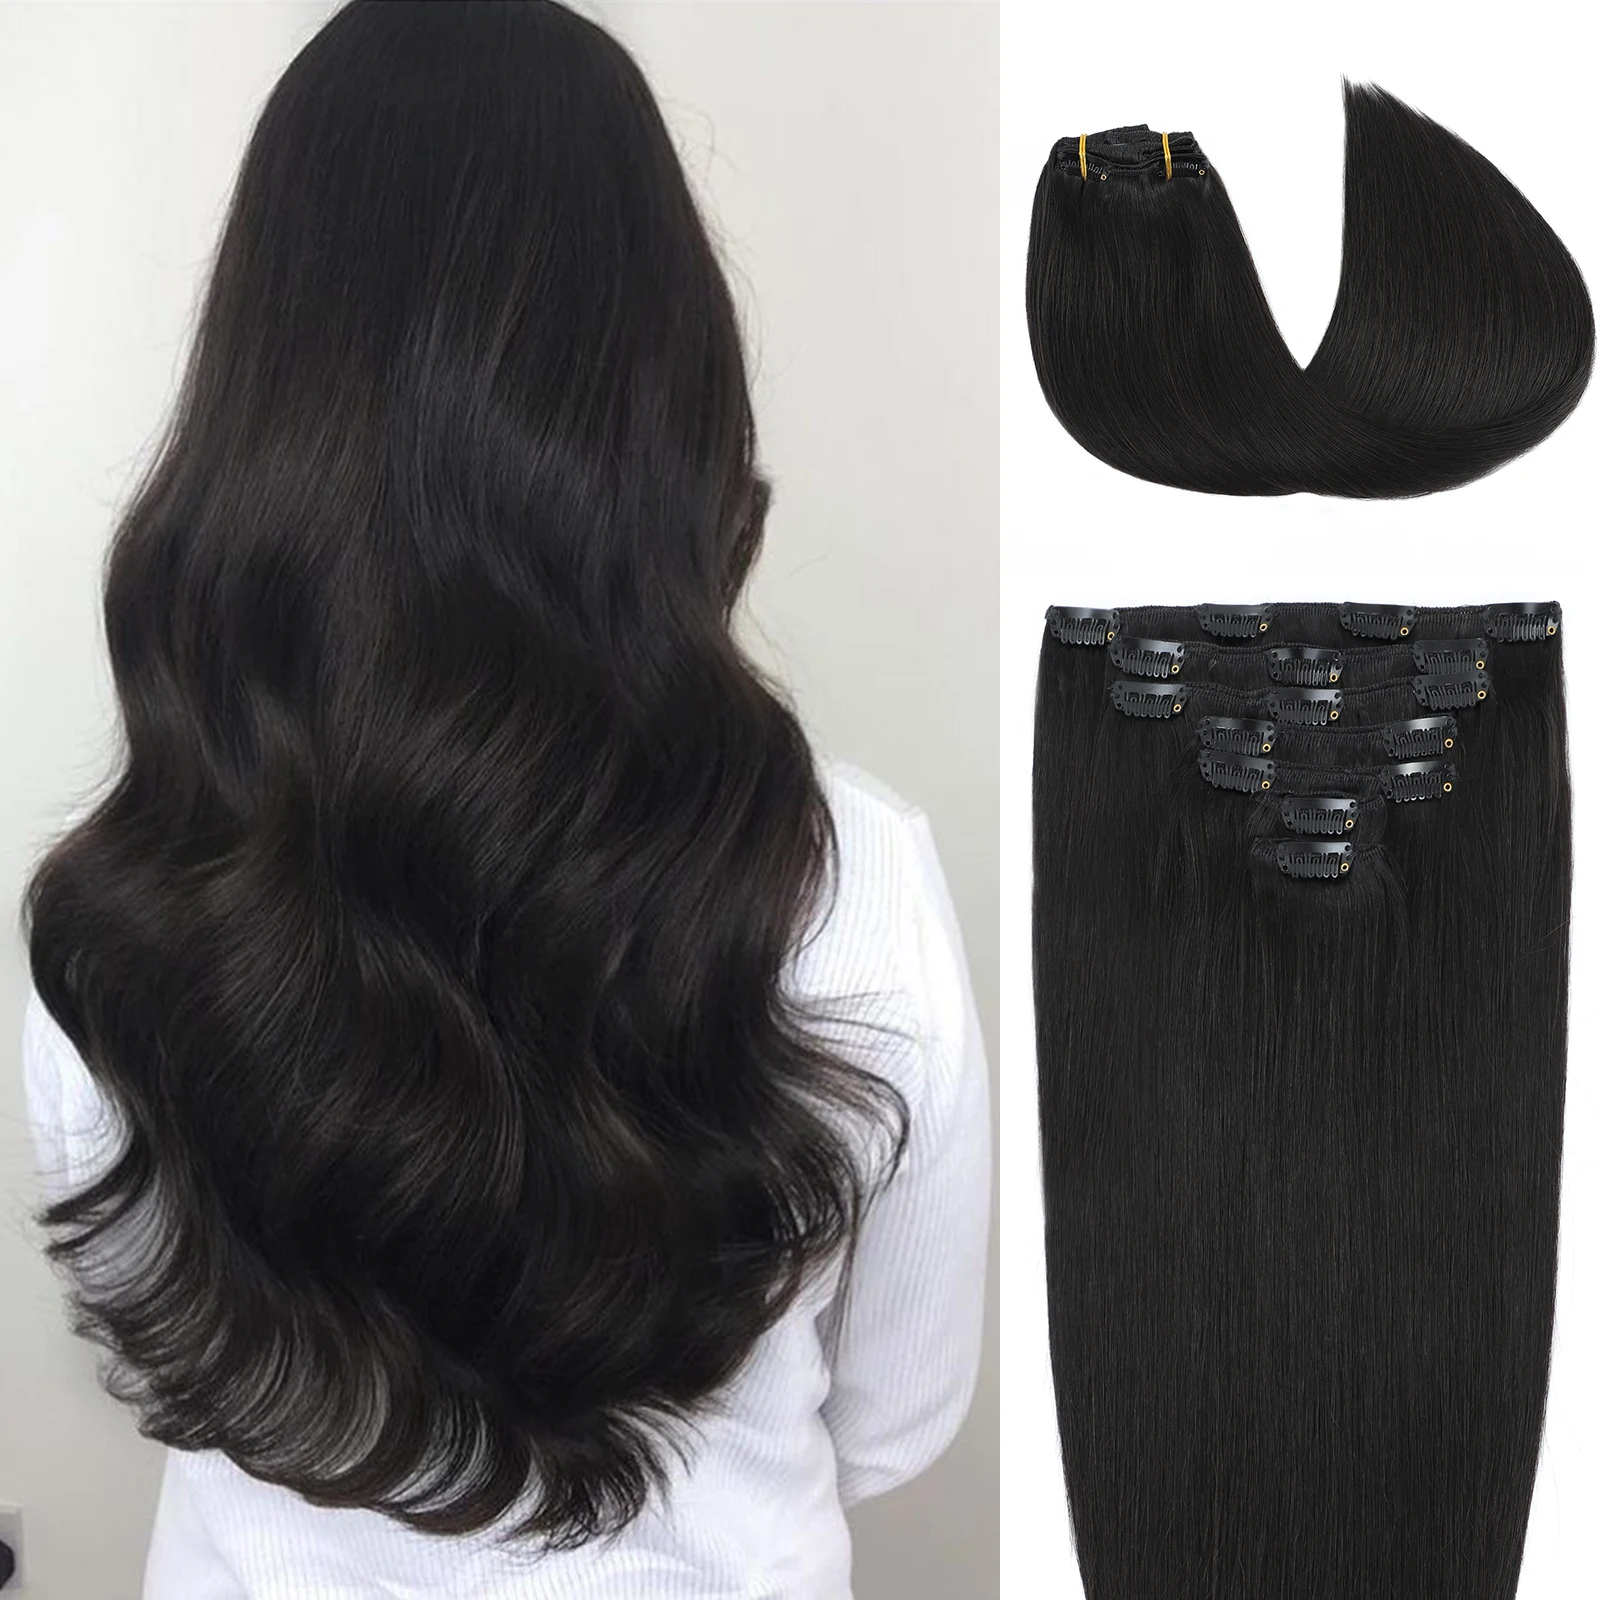 Clip in Hair Extensions Real Human Hair Jet Black Human Hair Extensions Clip In 7pcs 120g Straight Real Hair Extensions